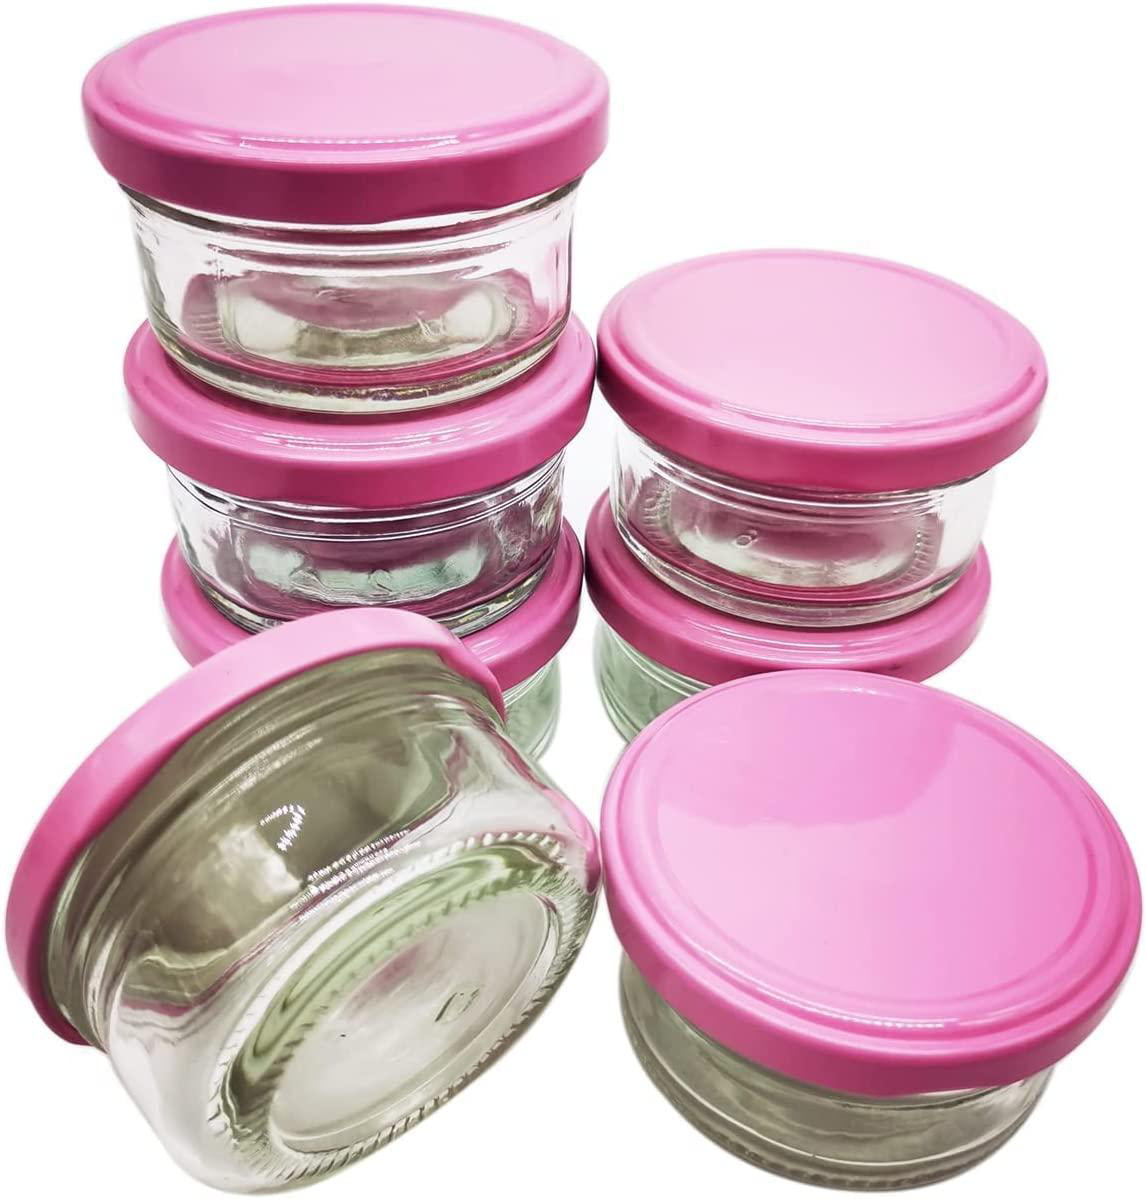 Pudy Roll Salad Dressing Container To Go 4 Pack, 4.5 Oz Glass Condiment  Containers With Leakproof Lid Reusable Dipping Sauce Cups Set BPA-Free  Salad